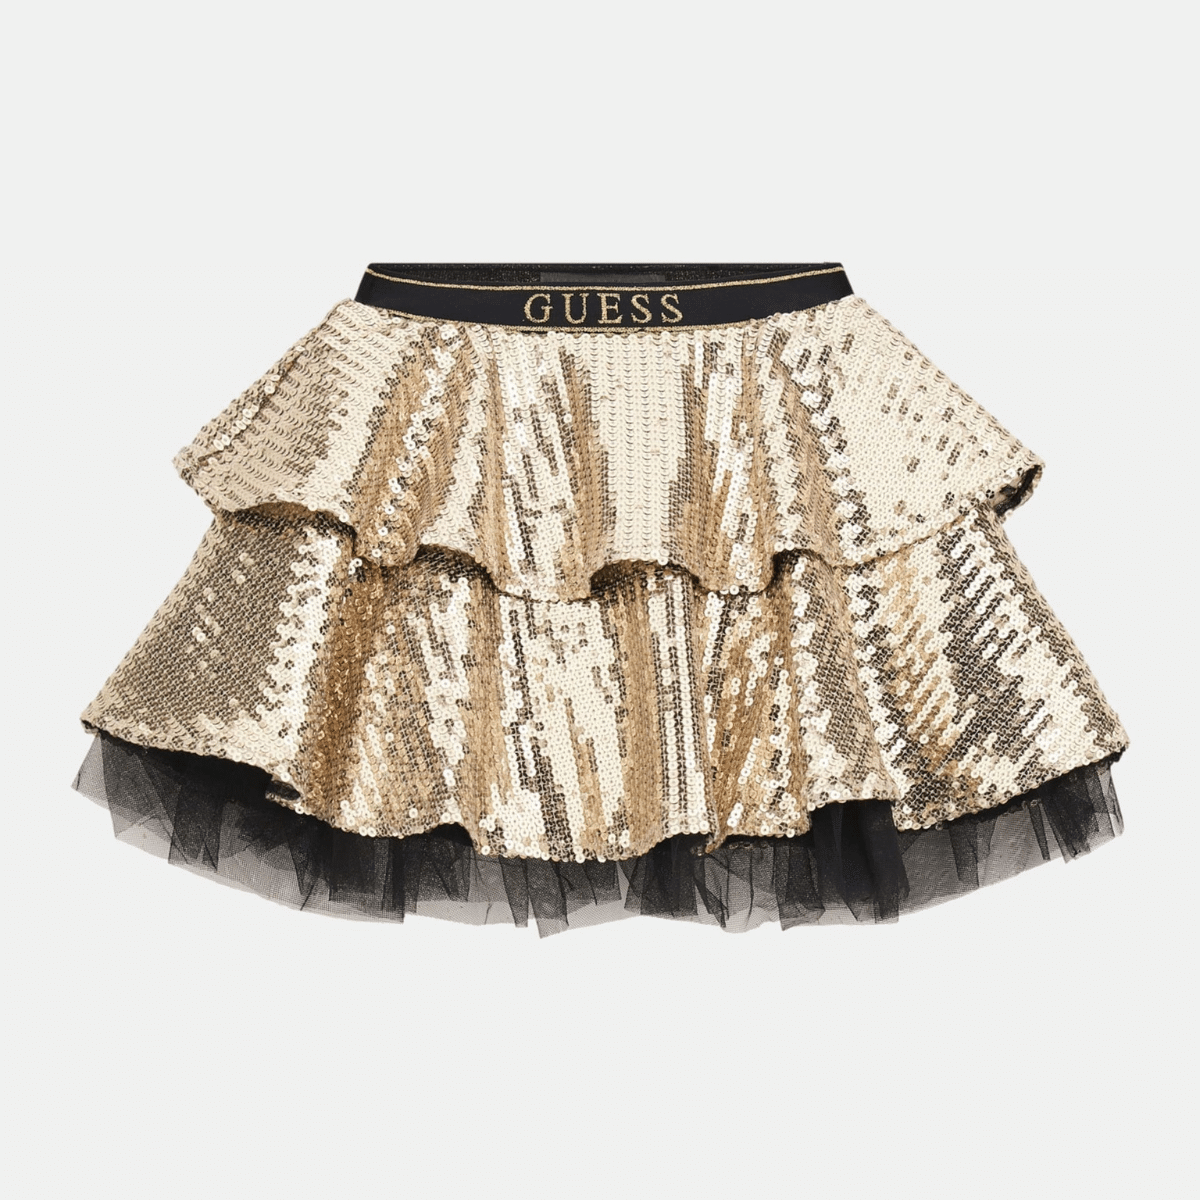 Guess sequin gold midi skirt on grey